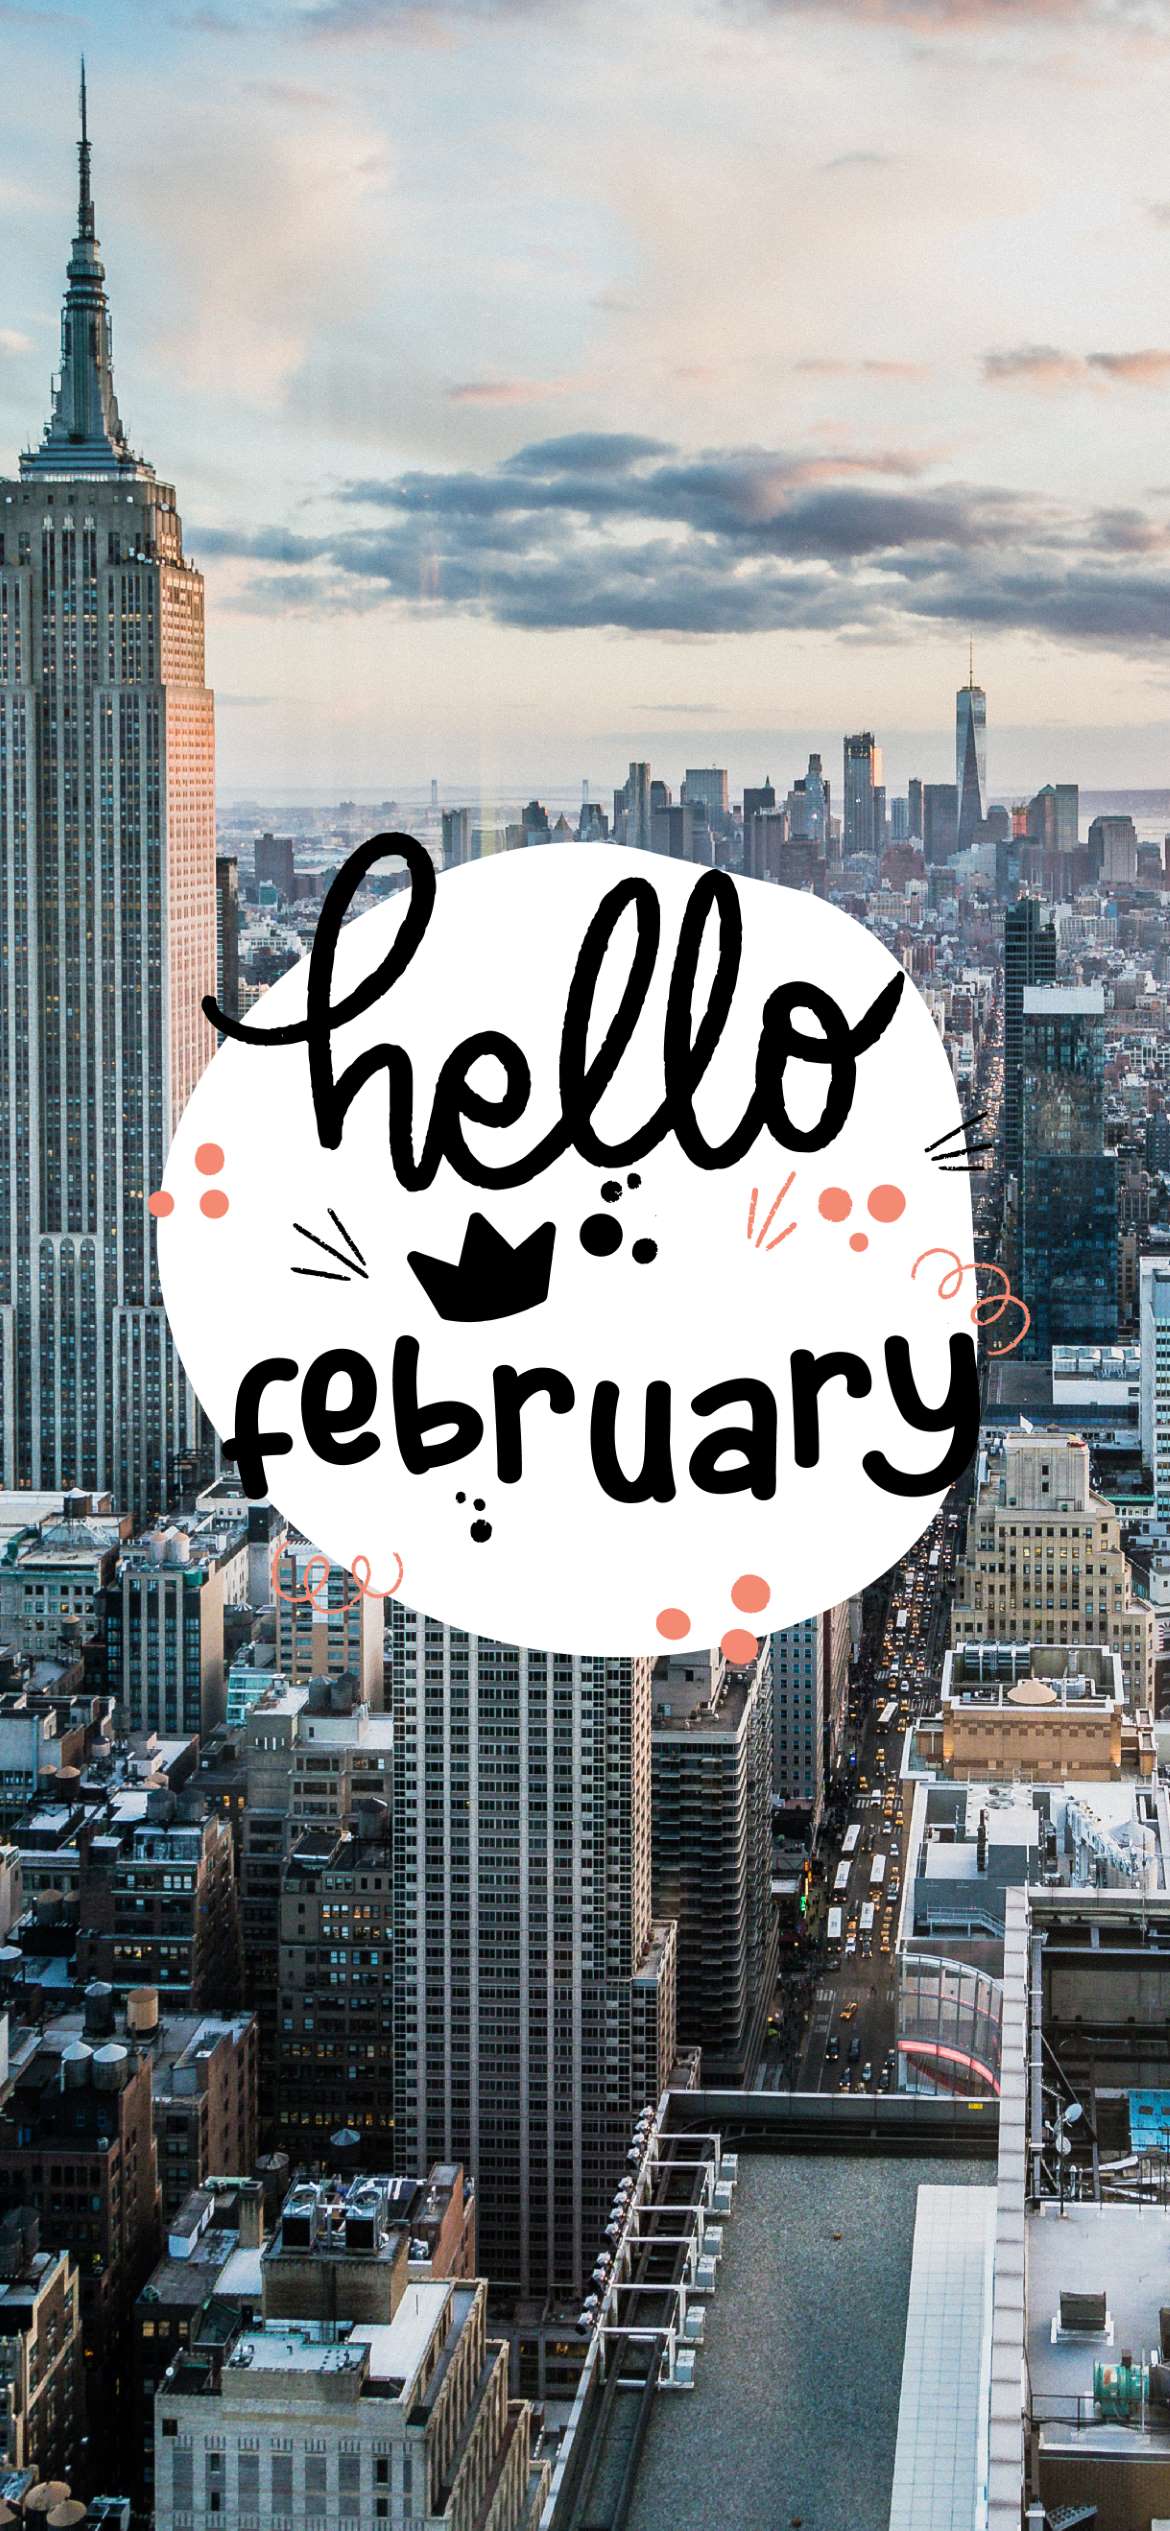 A city with the word hello february on it - Architecture